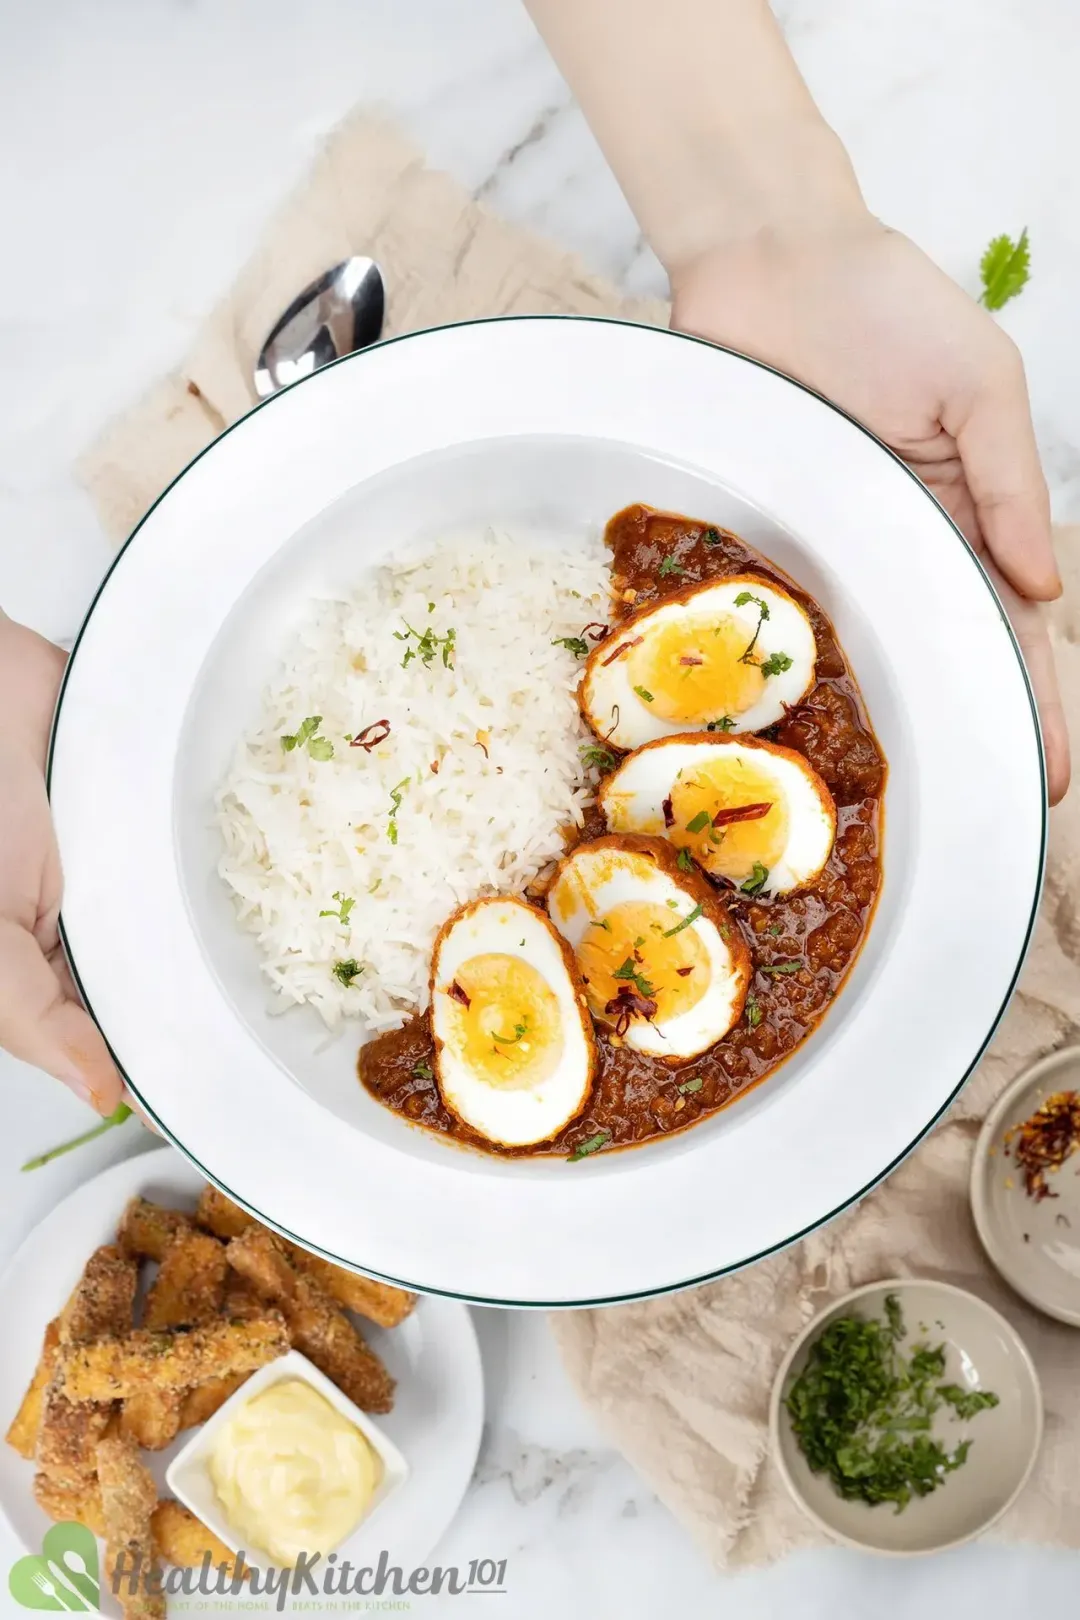 What to serve with Egg Curry